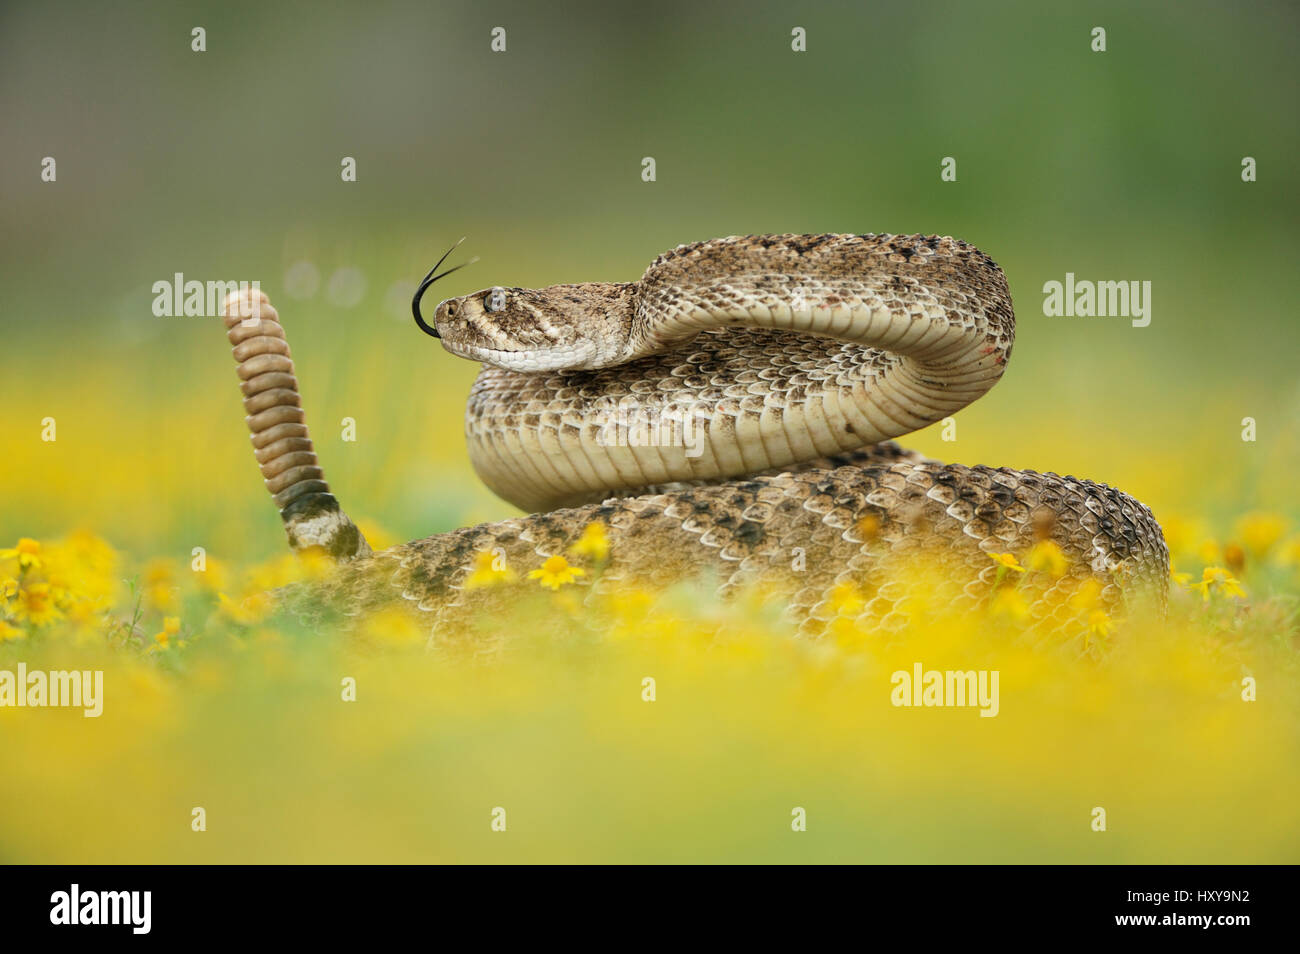 Western Diamondback Rattlesnake (Crotalus atrox), adult in striking pose with rattle raised, in wildflowers. Laredo, Webb County, South Texas, USA. April. Stock Photo